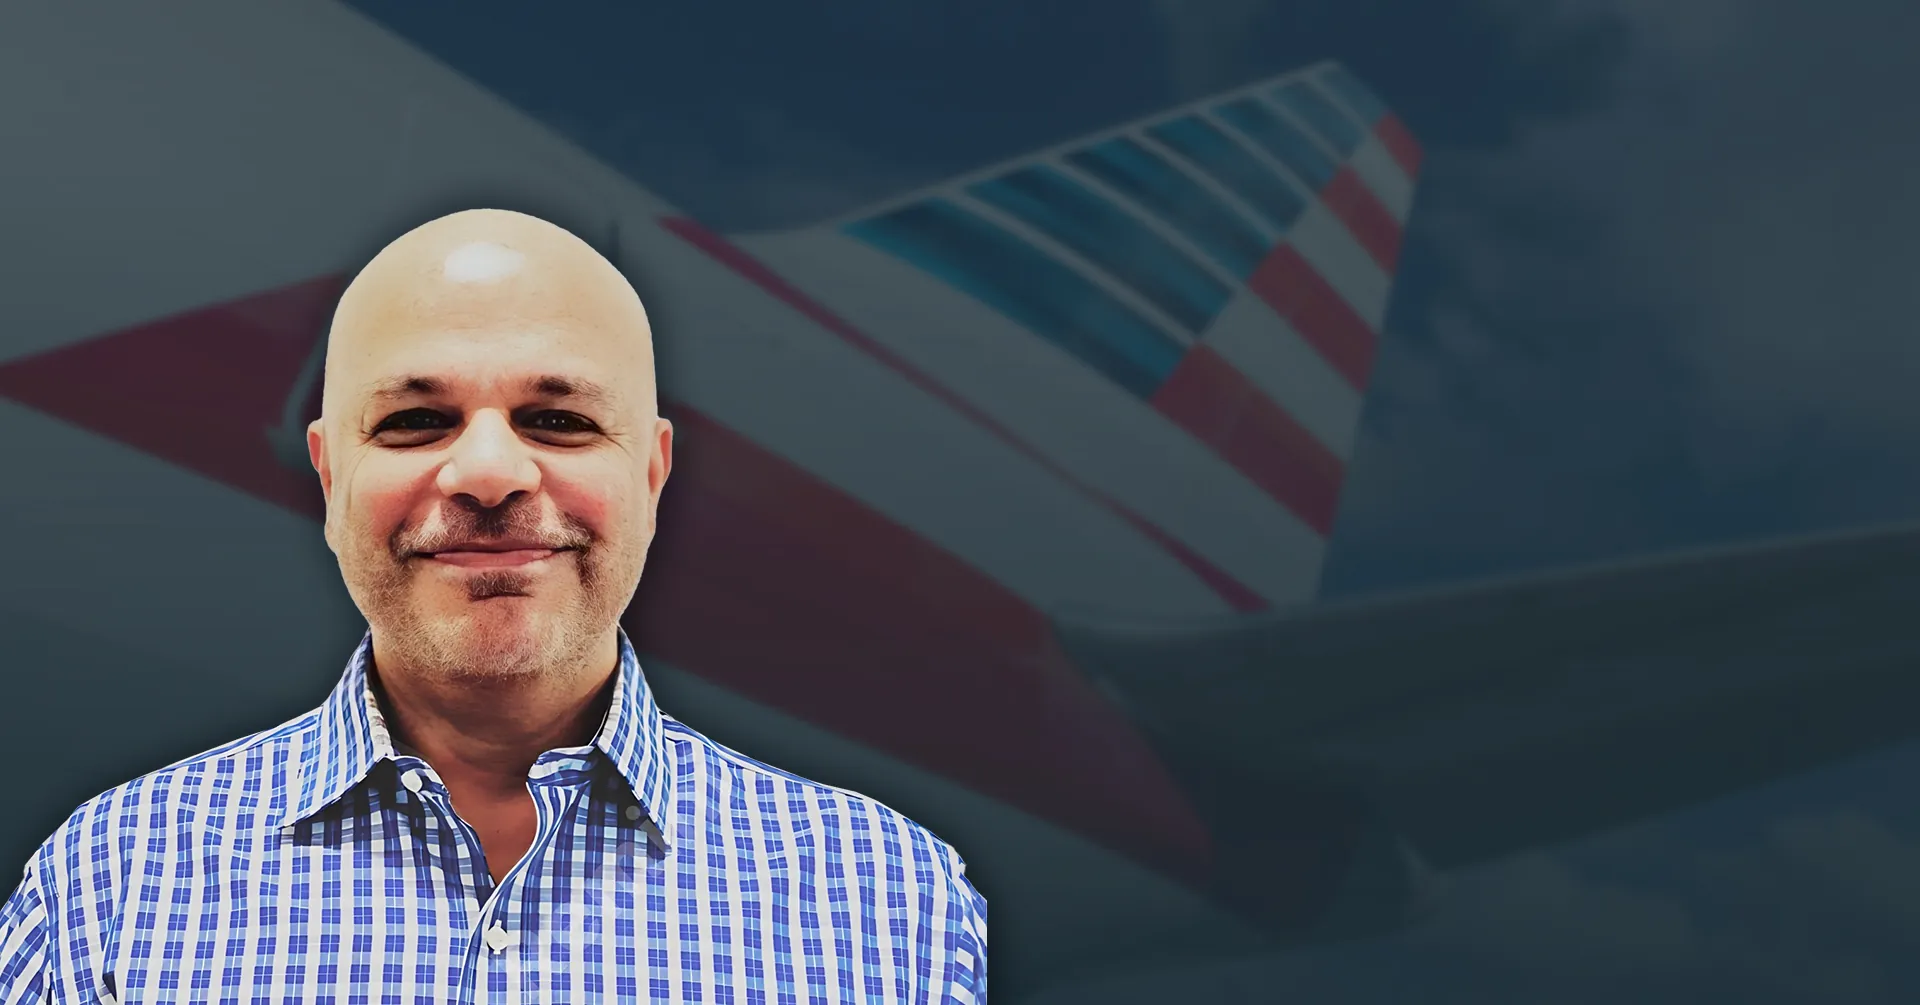 How American Airlines Manages Risk Through “Stractical” Intelligence